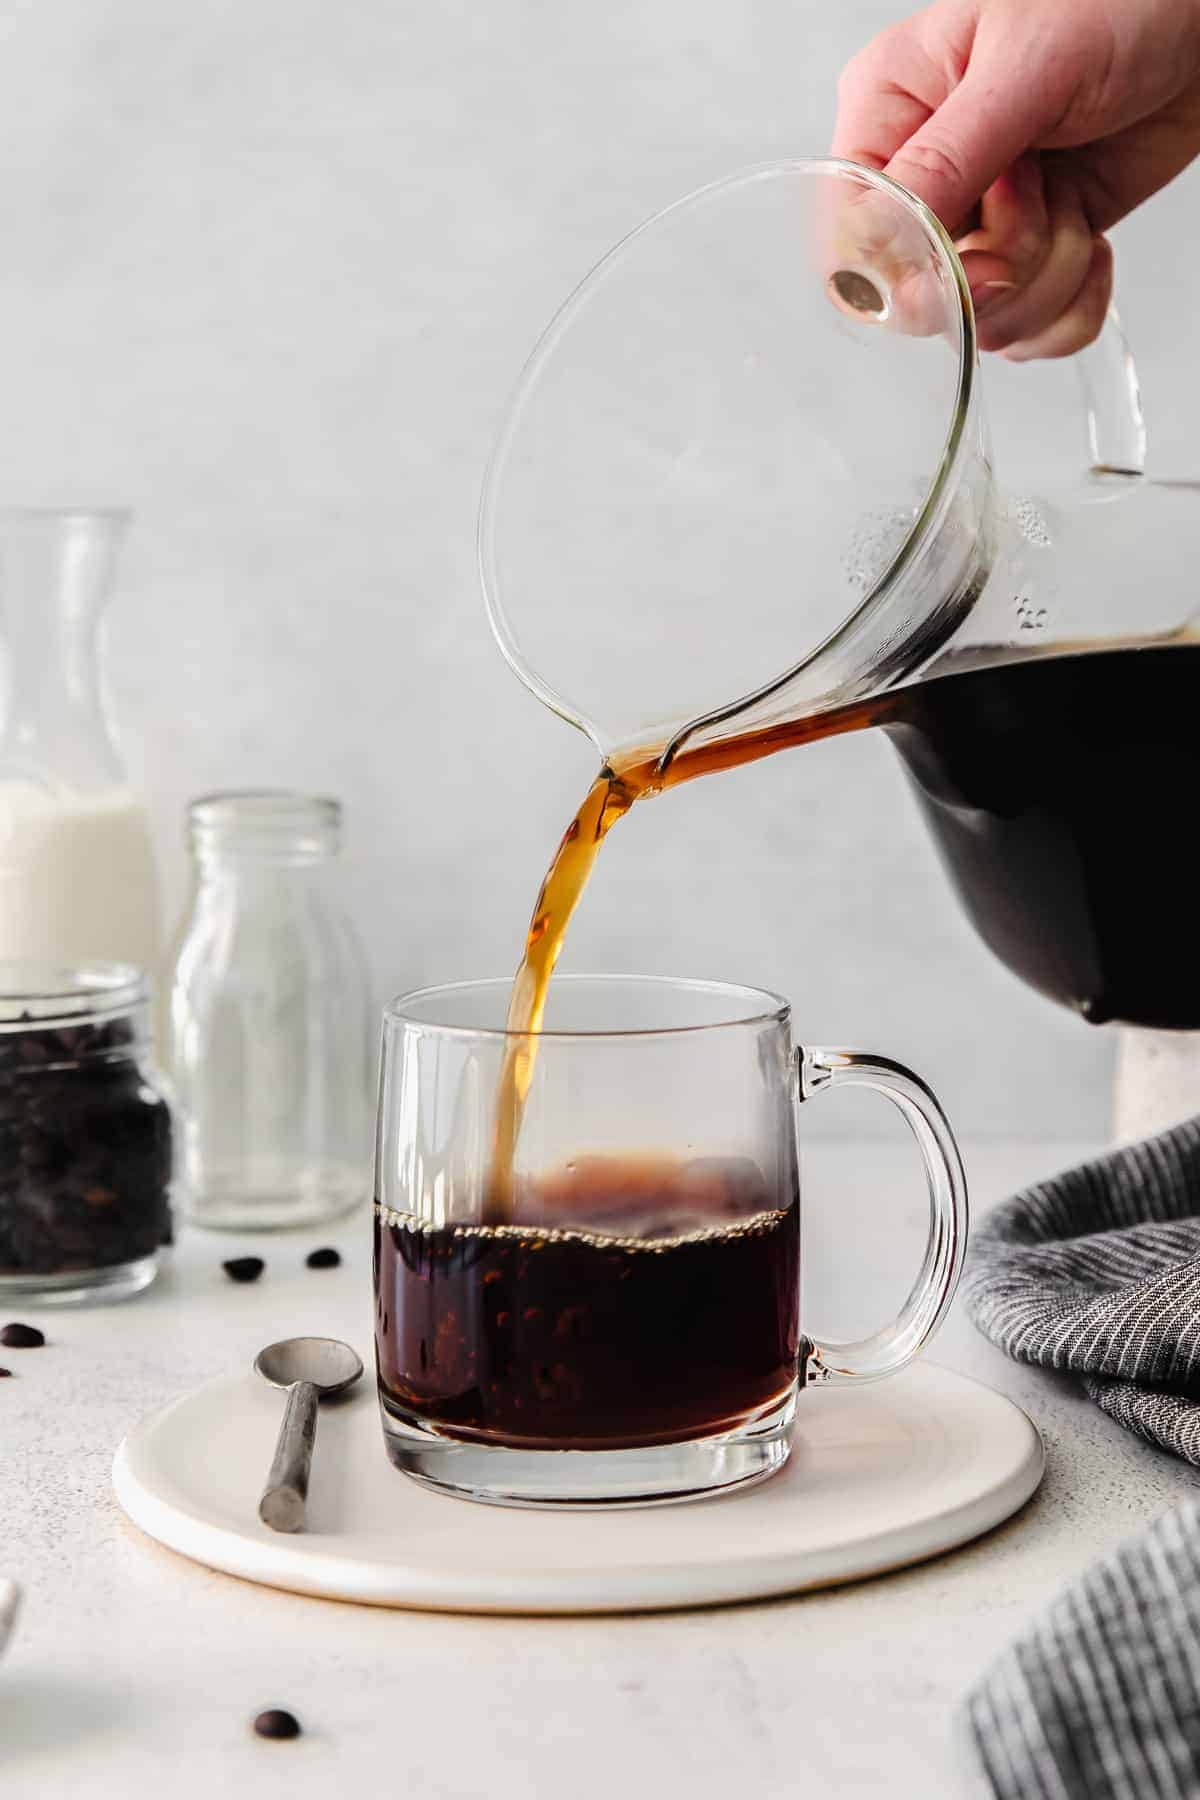 https://fitfoodiefinds.com/wp-content/uploads/2021/10/chemex-08.jpg